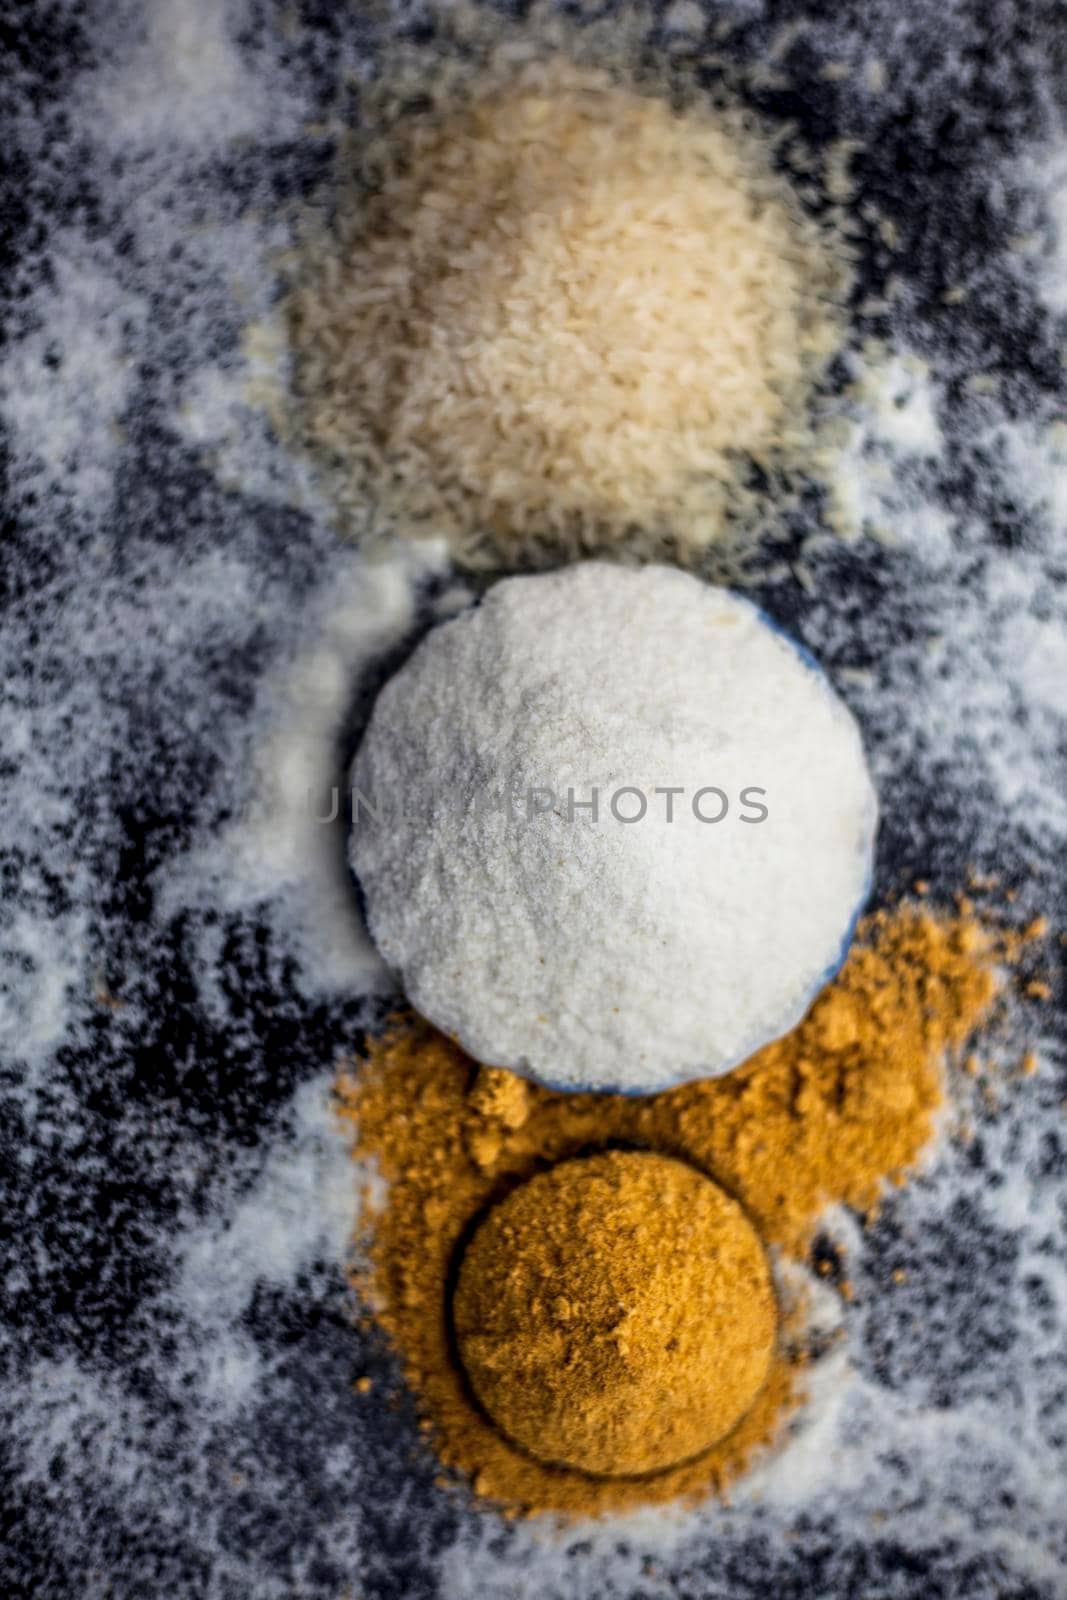 Face mask for glowing skin on wooden surface consisting of rice flour & dried orange peel powder in a glass bowl along with some rice flour spread on the surface for greater effect.Vertical shot. by mirzamlk